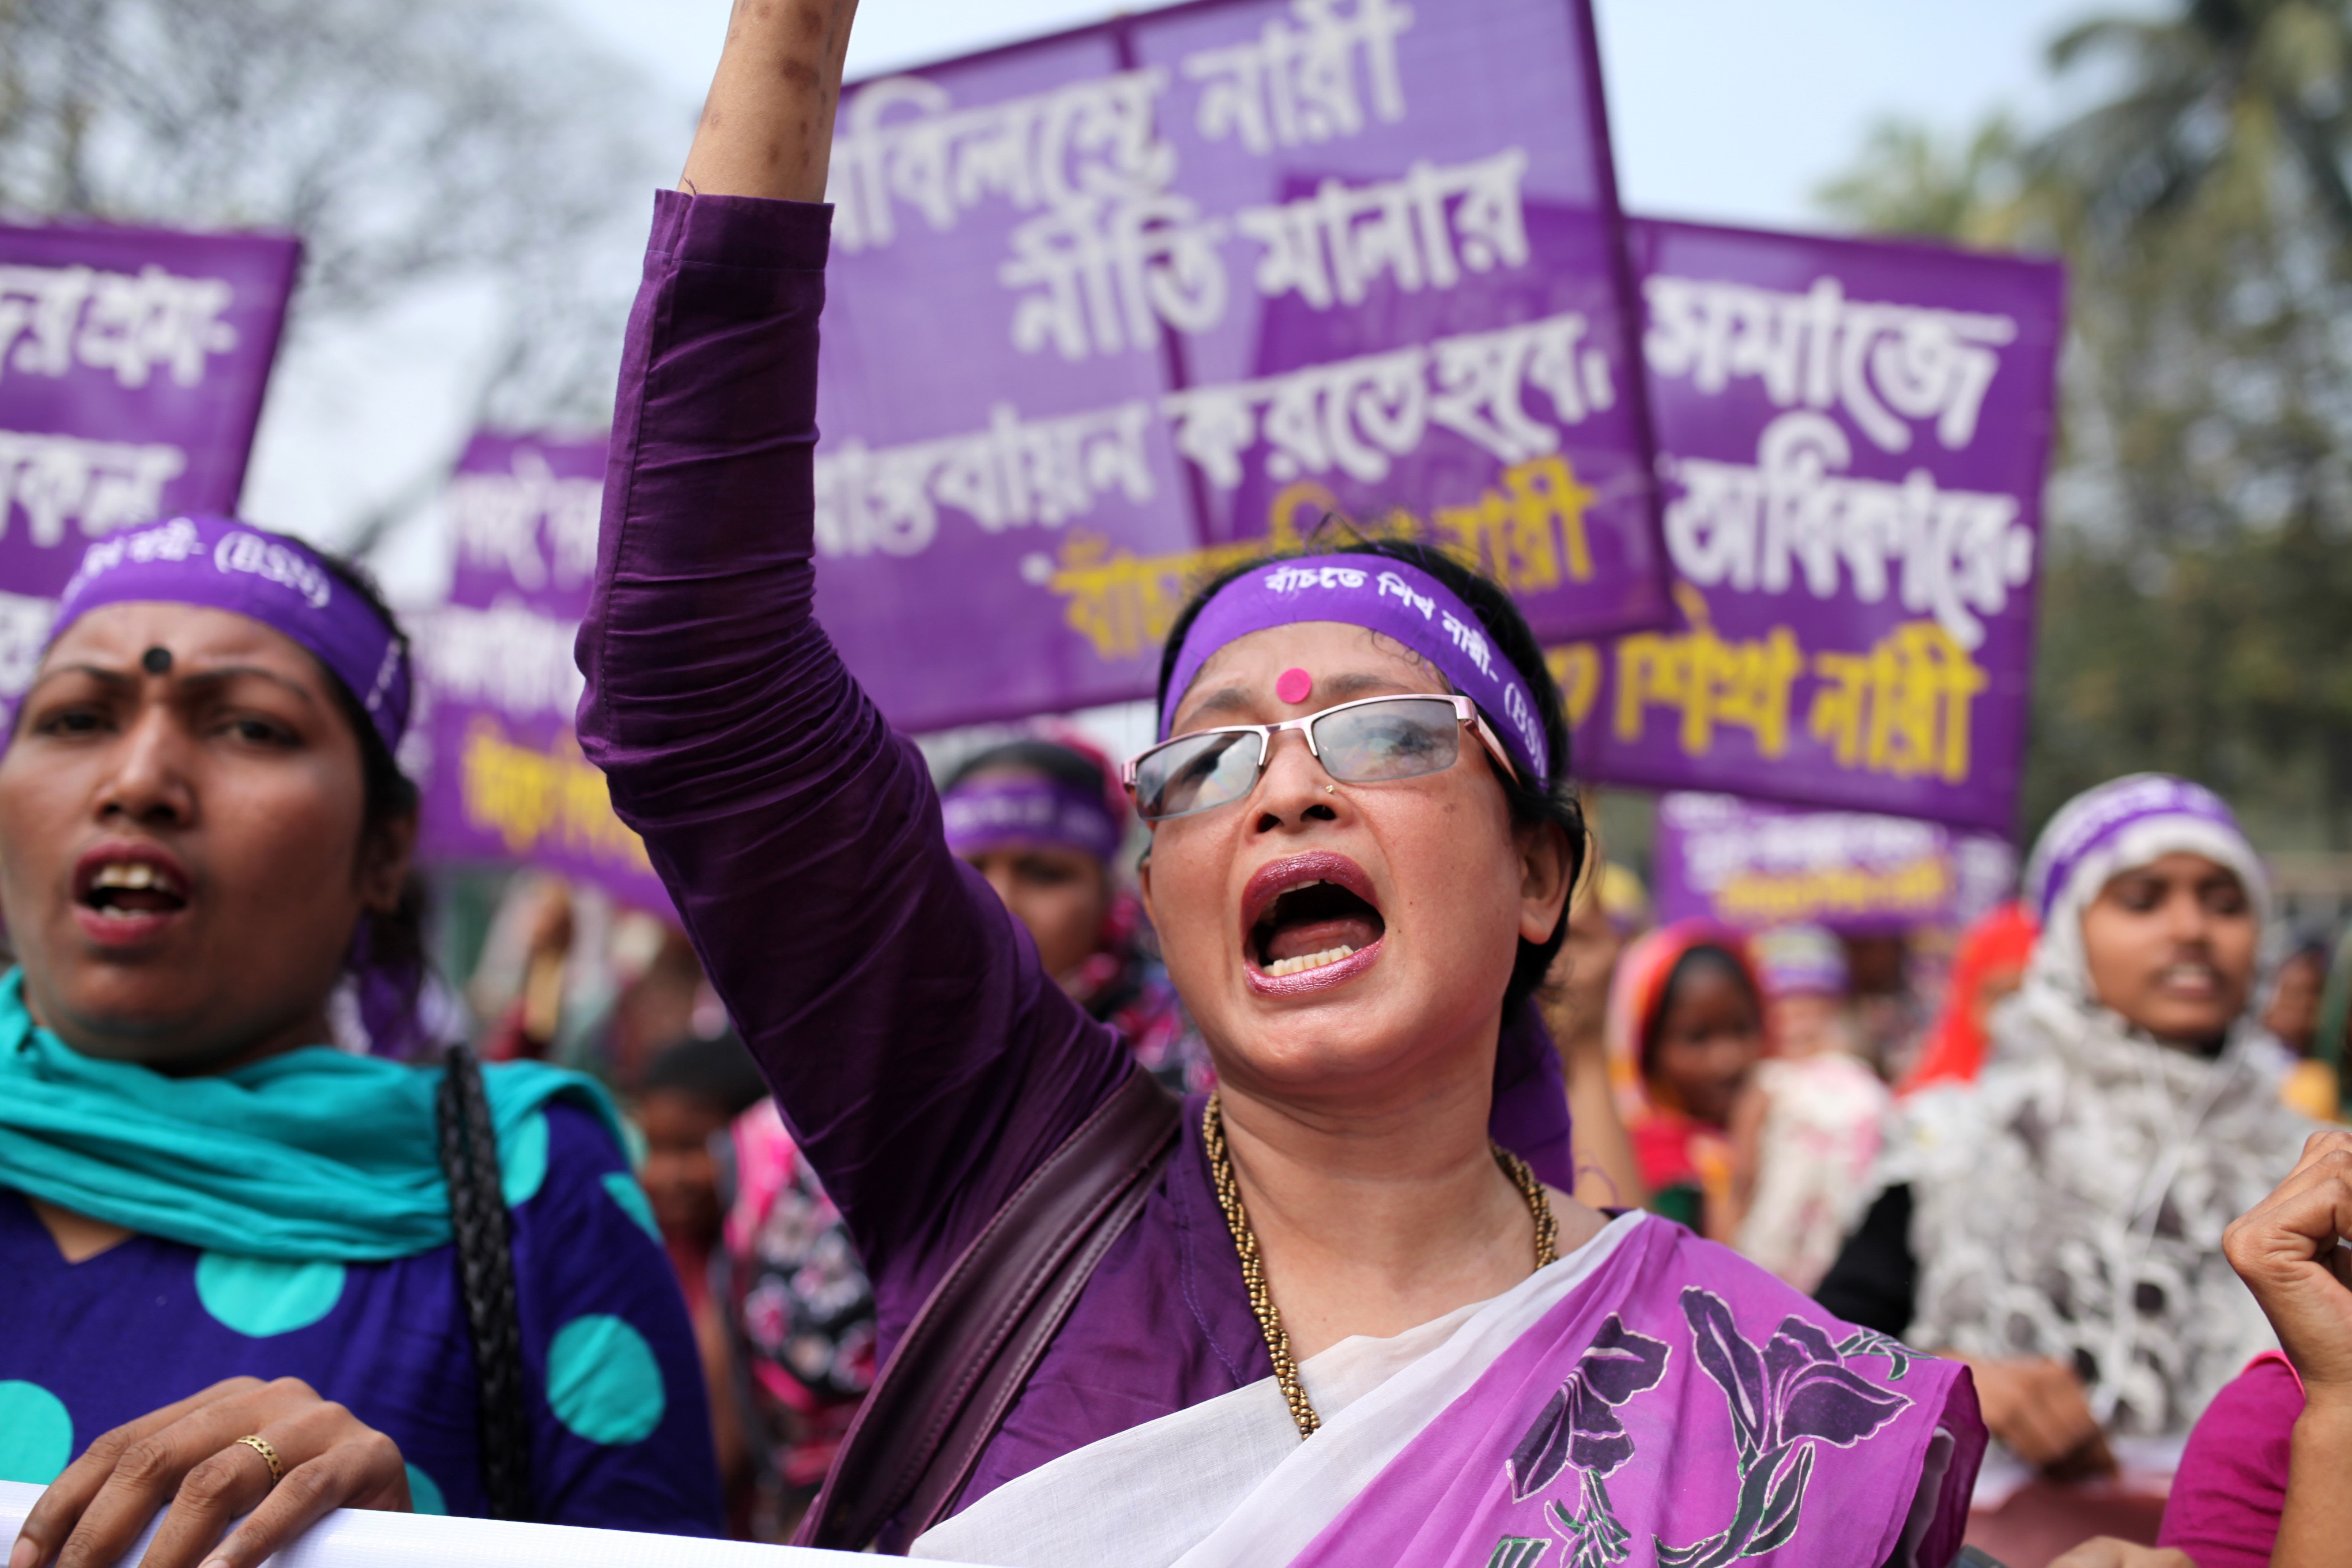 Bangladeshi activists and garment workers attend a rally in front of National Press Club during International Women's Day in Dhaka, Bangladesh on March 08, 2016. (Zakir Hossain Chowdrey—Anadolu Agency/Getty Images)